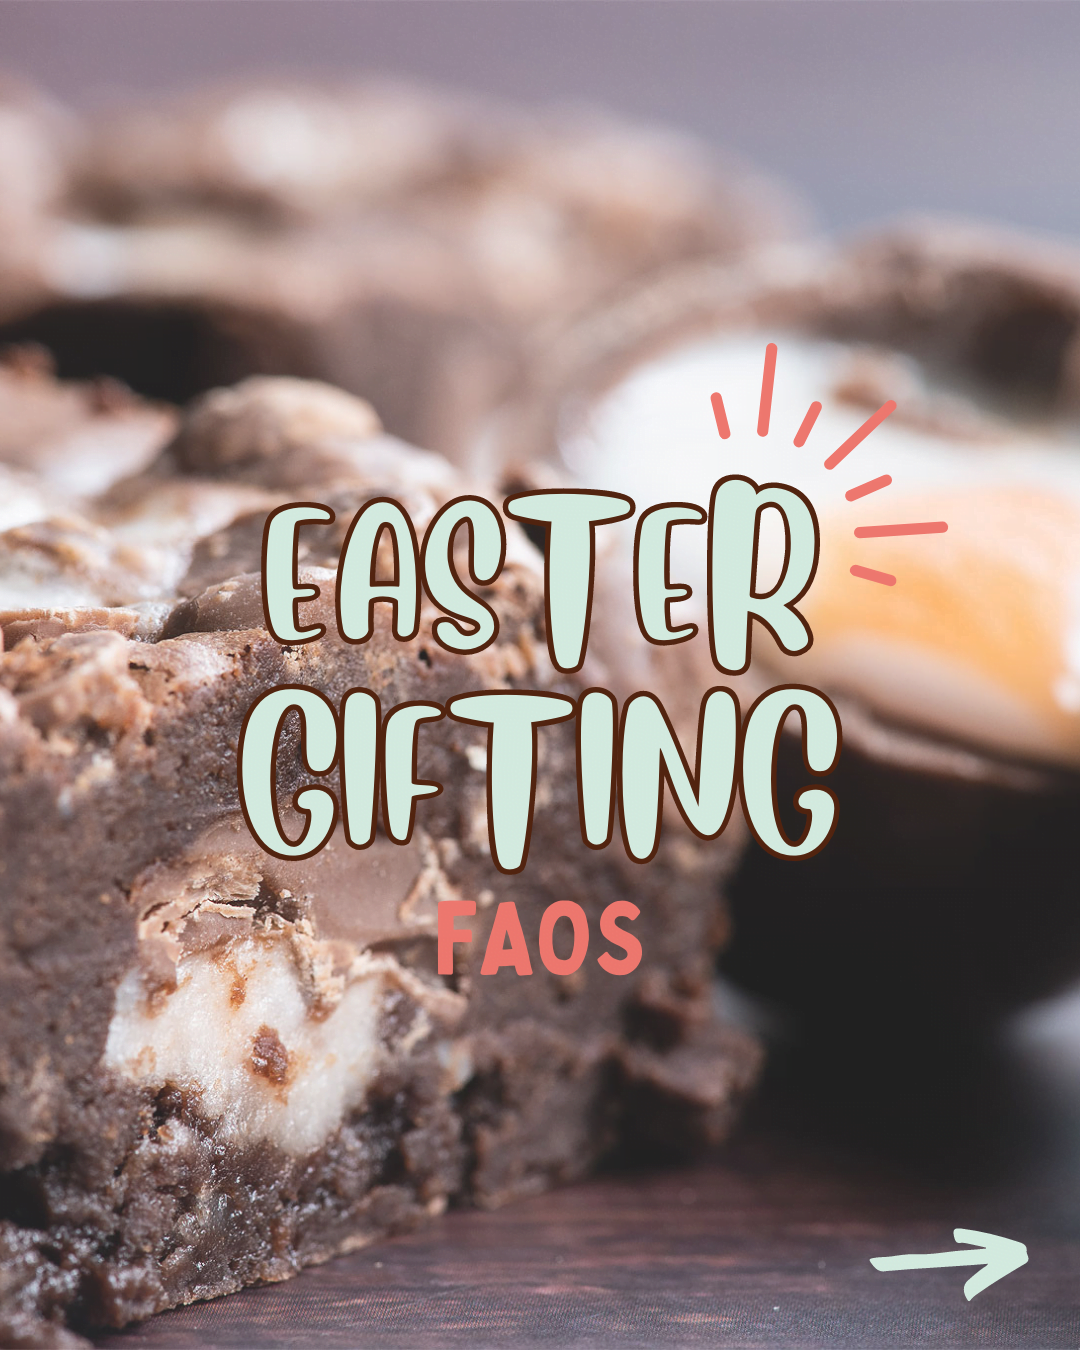 Easter chocolate brownies on a brown background with Cadbury Creme Eggs cut in half. The text reads Easter Gifting FAQs.